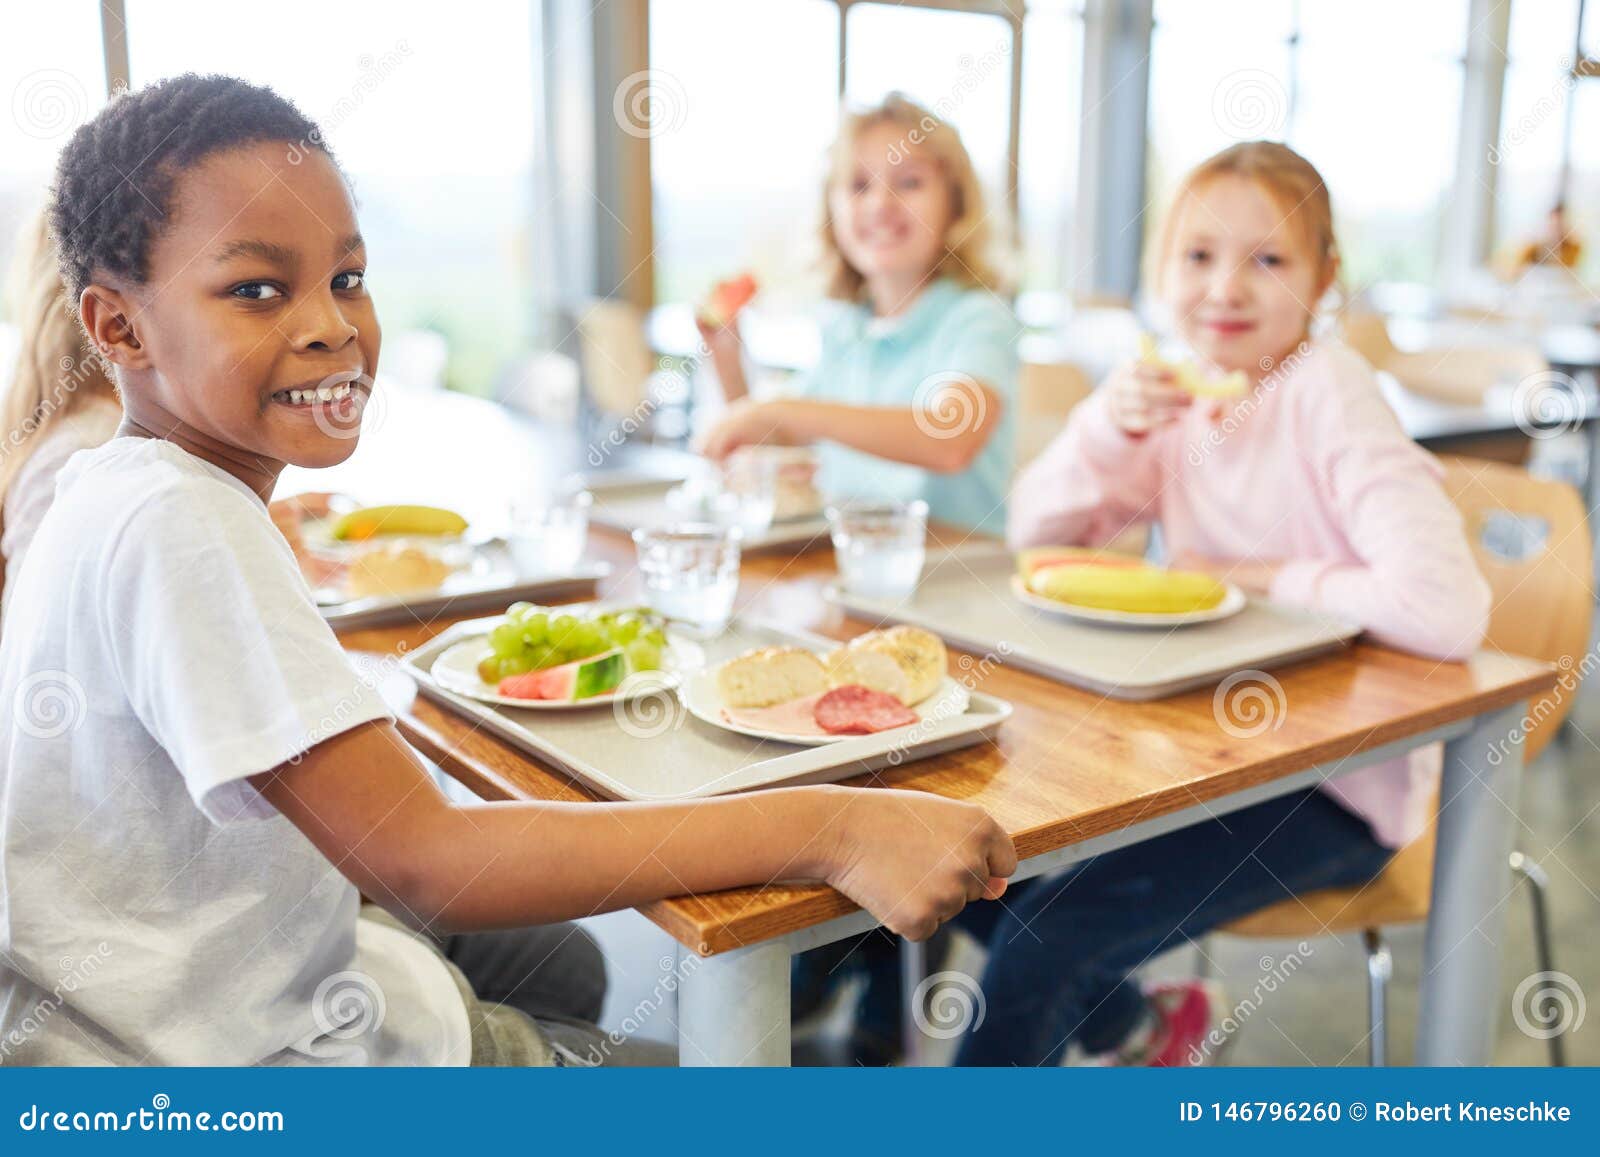 https://thumbs.dreamstime.com/z/children-eat-together-canteen-multicultural-elementary-school-146796260.jpg